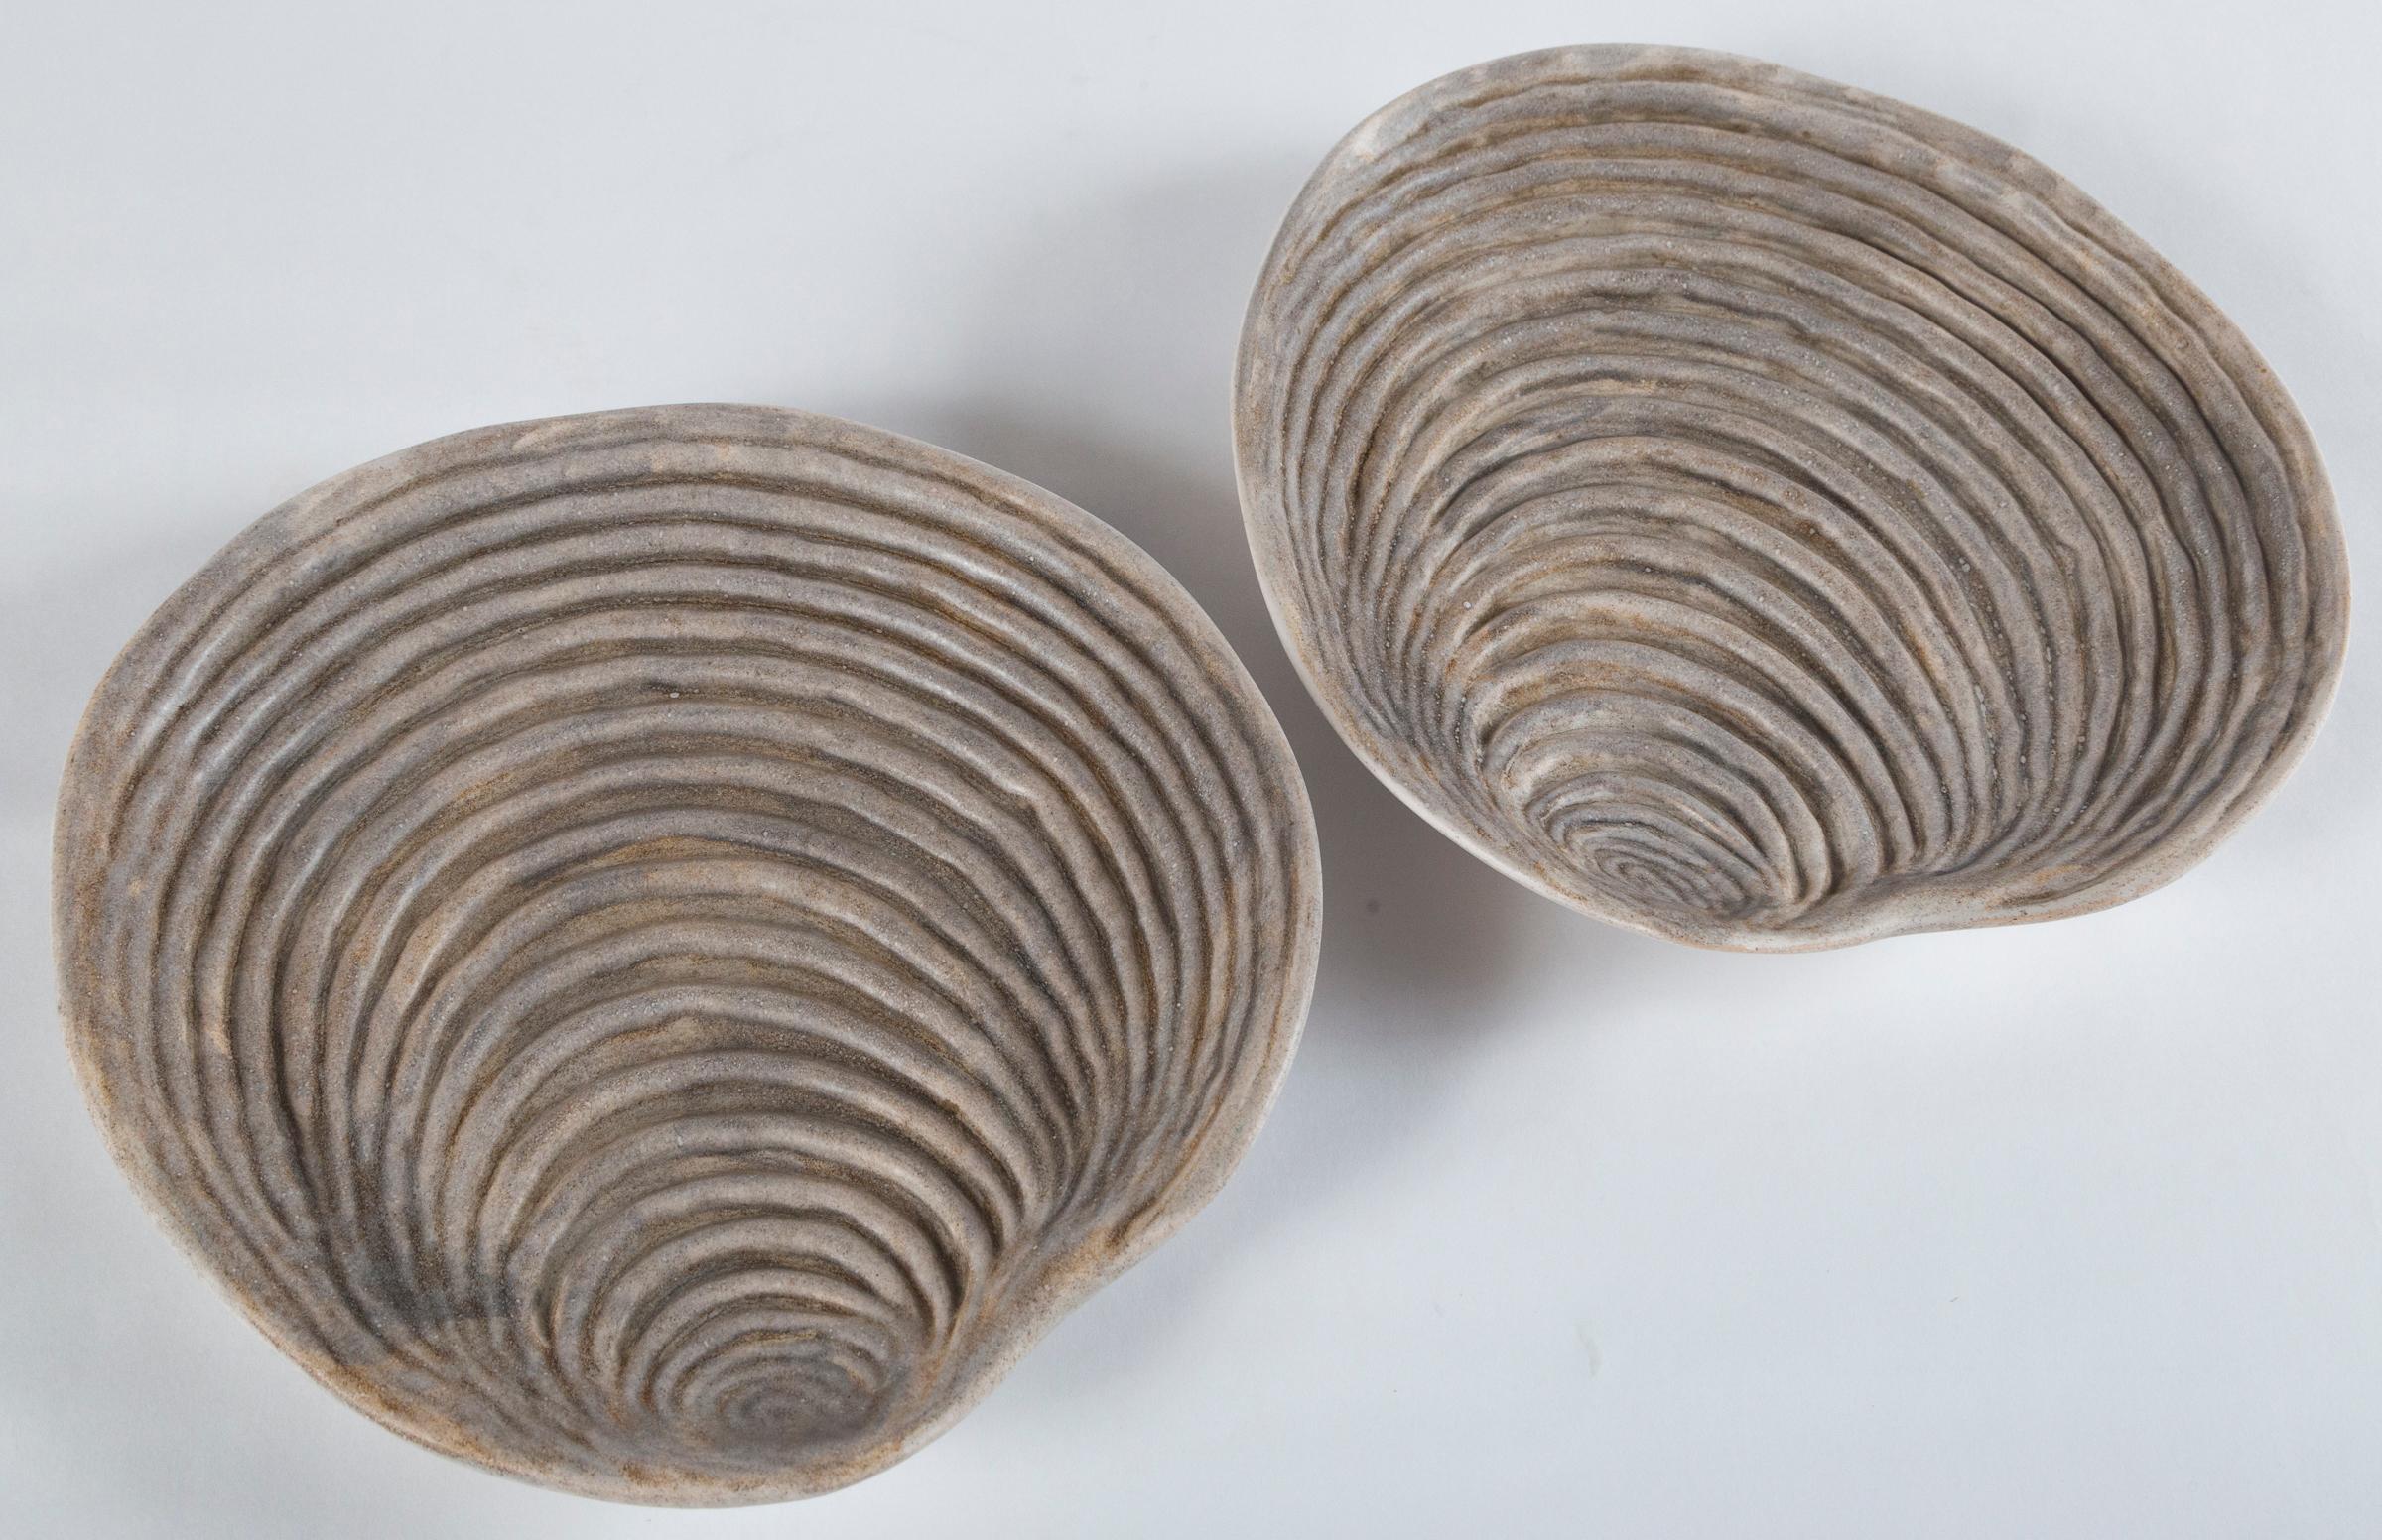 Pair of ceramic oyster shell plates, Marcel Guillot, France, circa 1950s. Marcel Guillot (1910-1985) was a prominent ceramic artist with a studio in Paris, known to incorporate unusual glazes and forms.